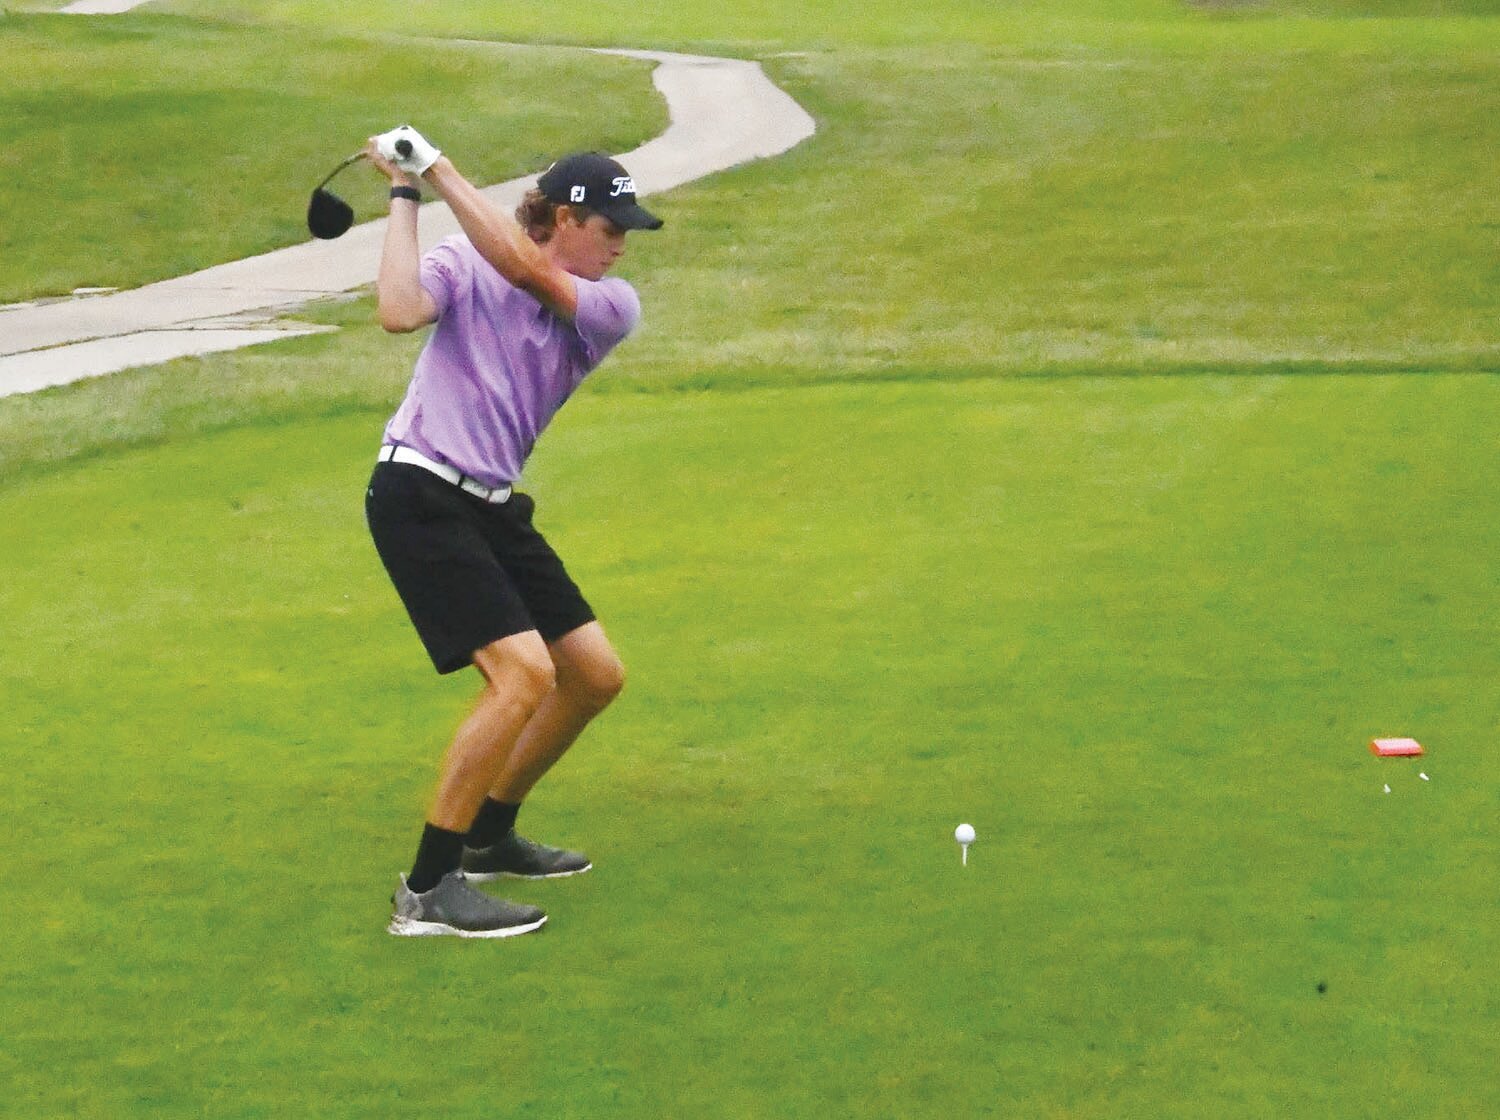 Salisbury golfer Elliot Carter tees off during the Class 1 state boys golf tournament in Columbia.